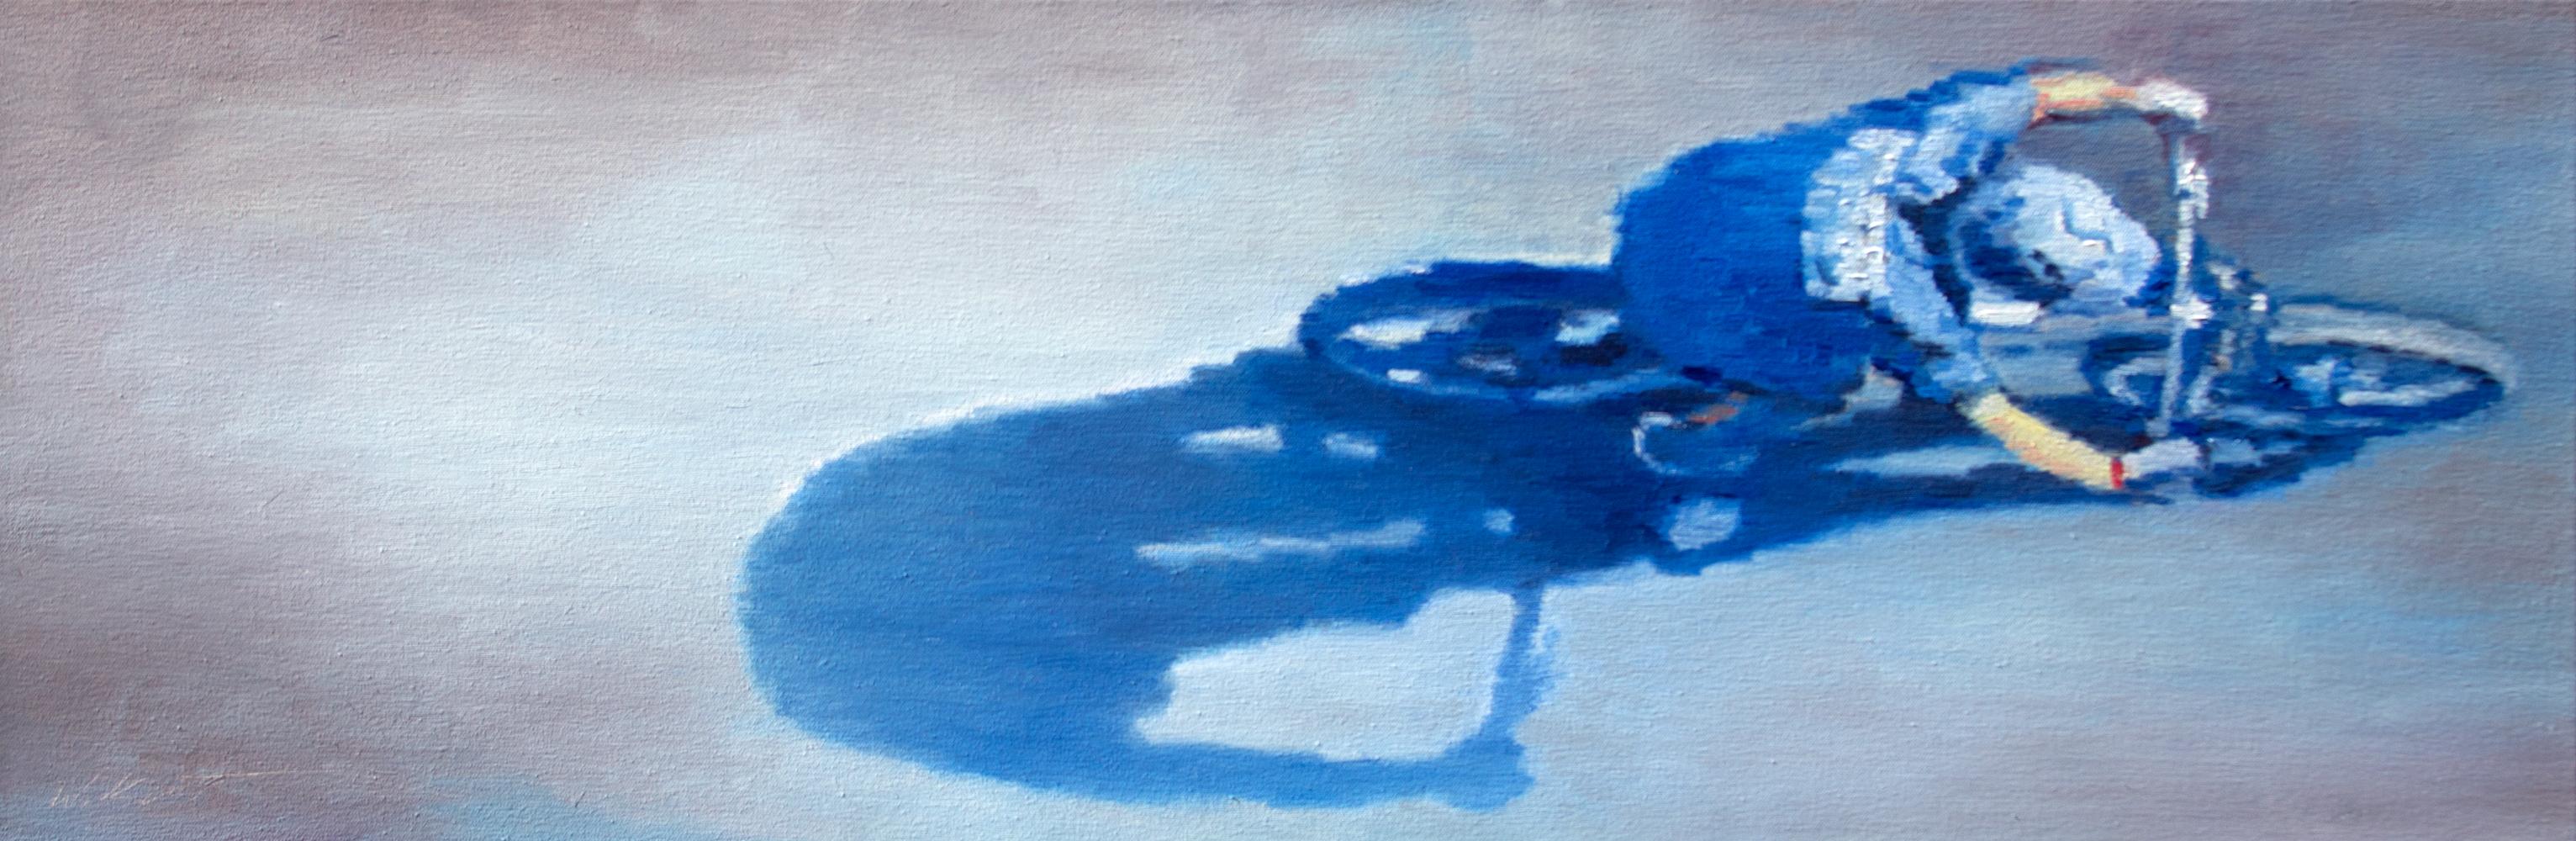 Warren Keating Figurative Painting - Bicycling in Blue, Oil Painting